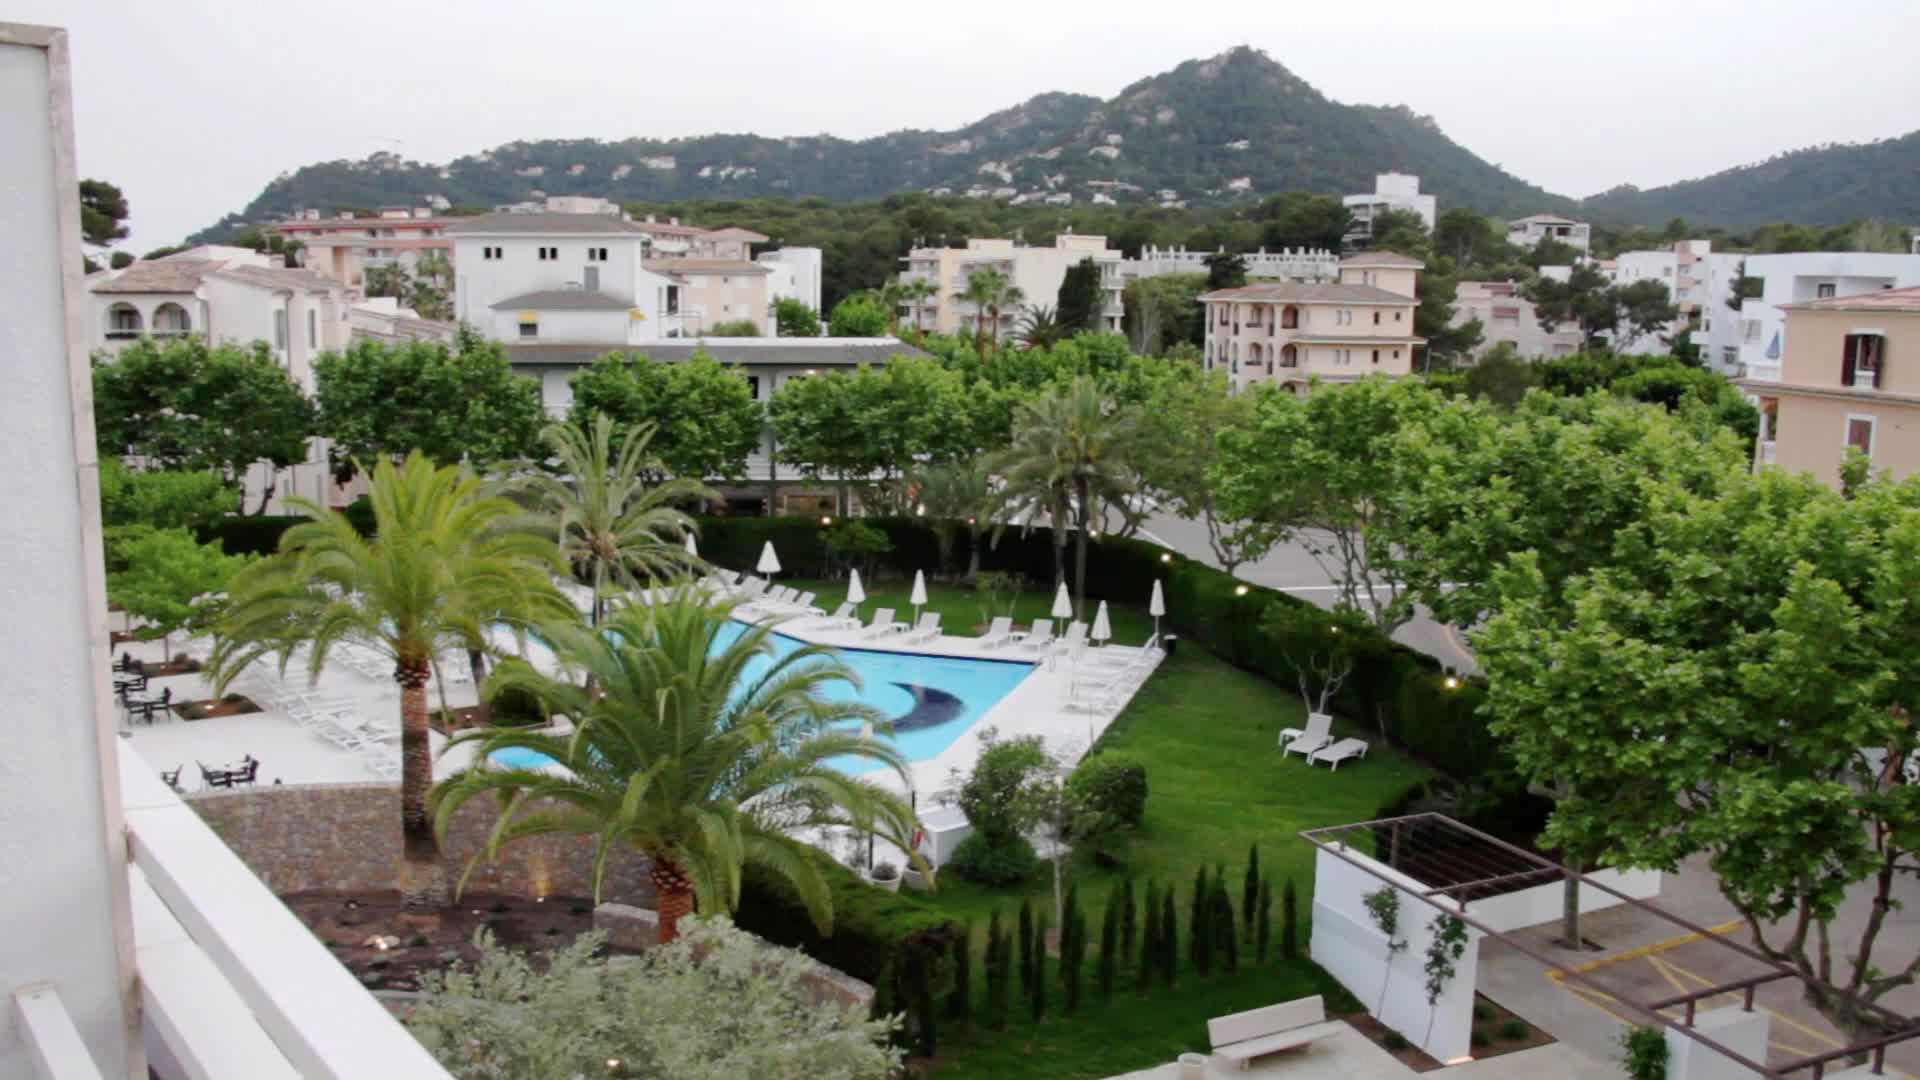 Canyamel Park Hotel & Appartements